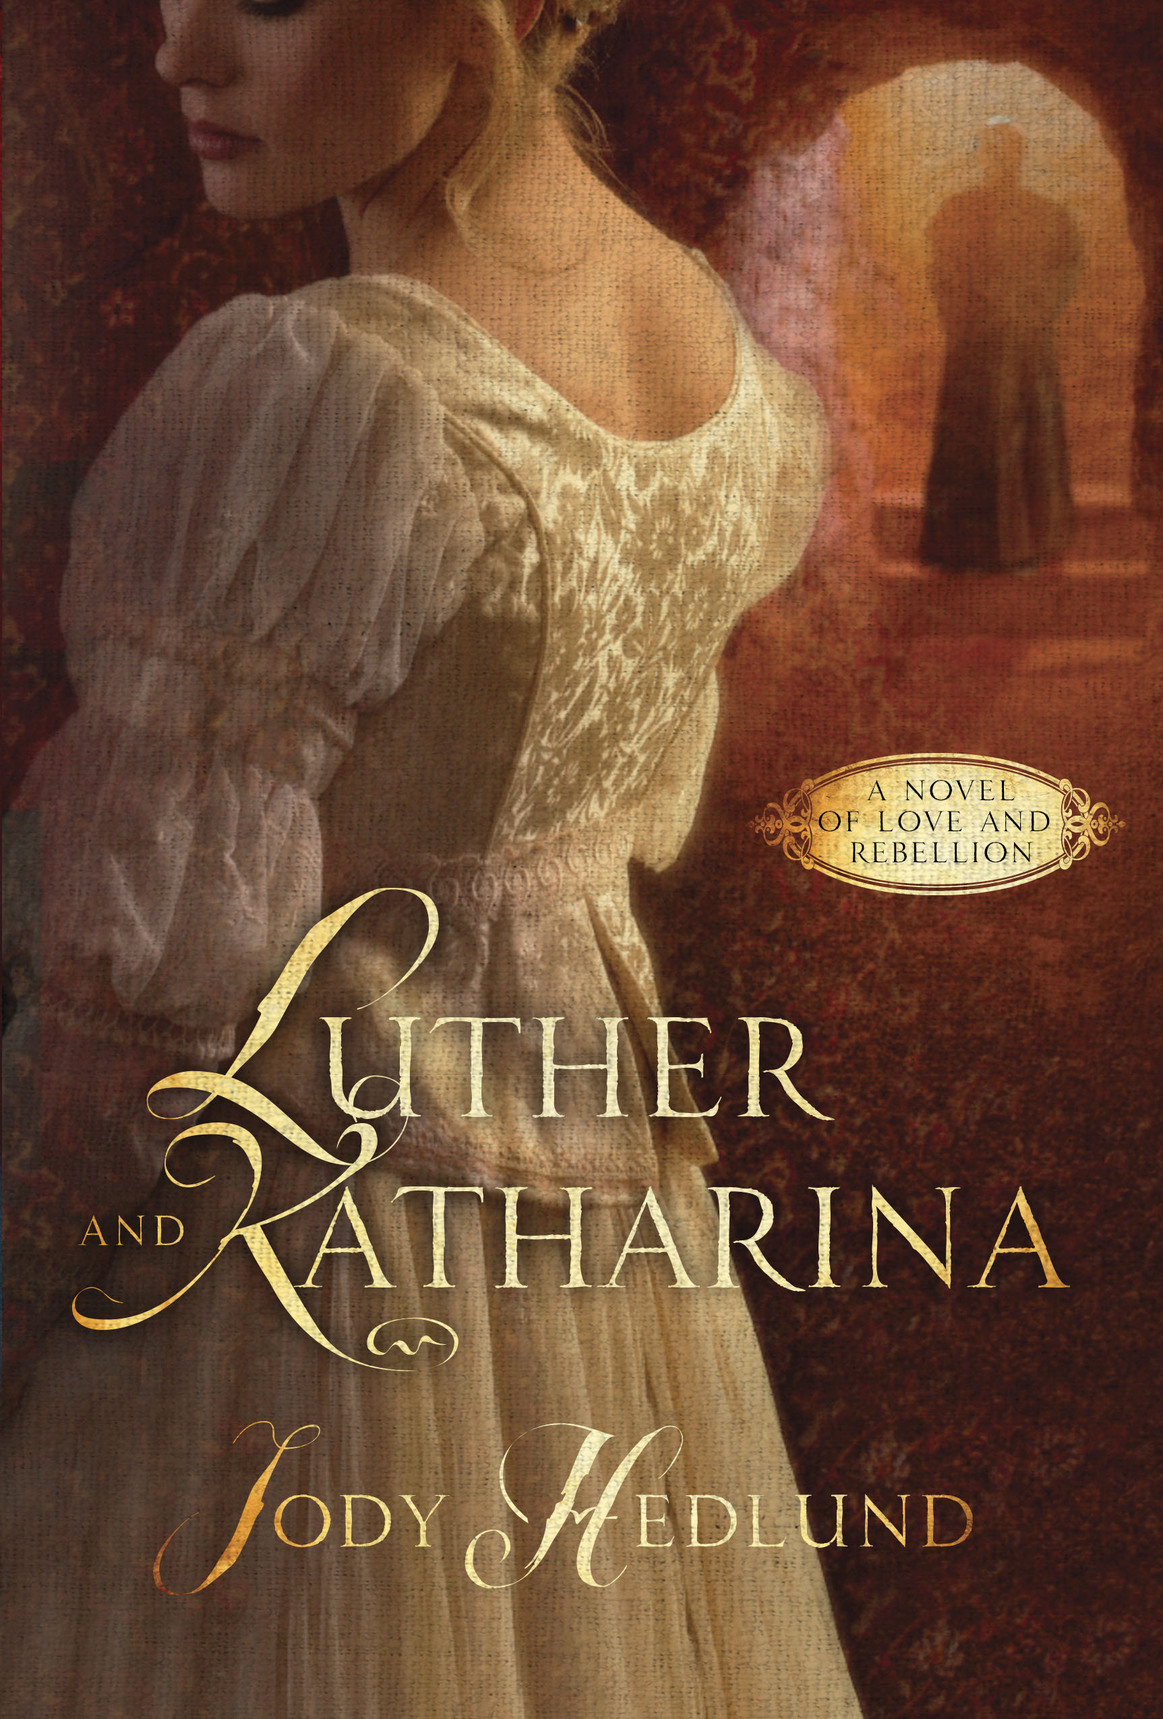 Luther and Katharina (2015) by Jody Hedlund